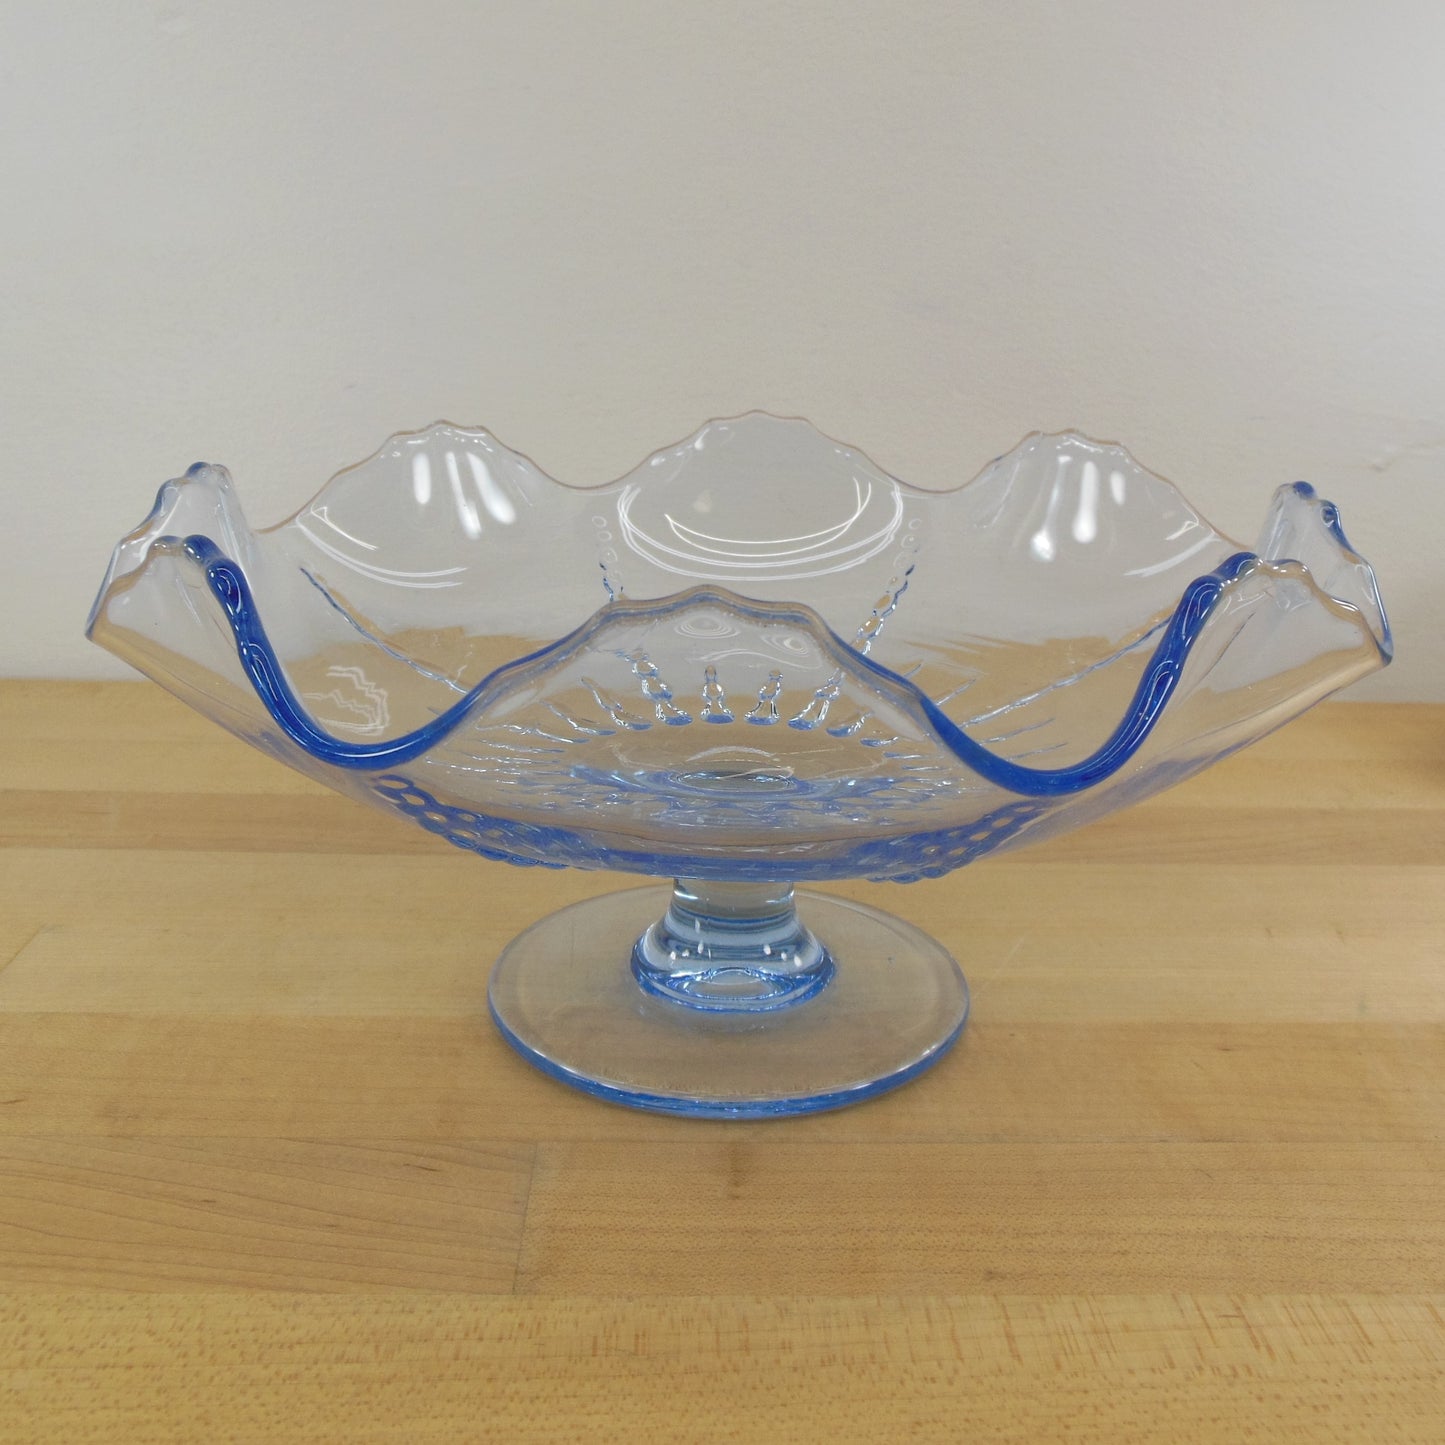 New Martinsville 1930's Radiance Ice Blue Compote Footed Bowl